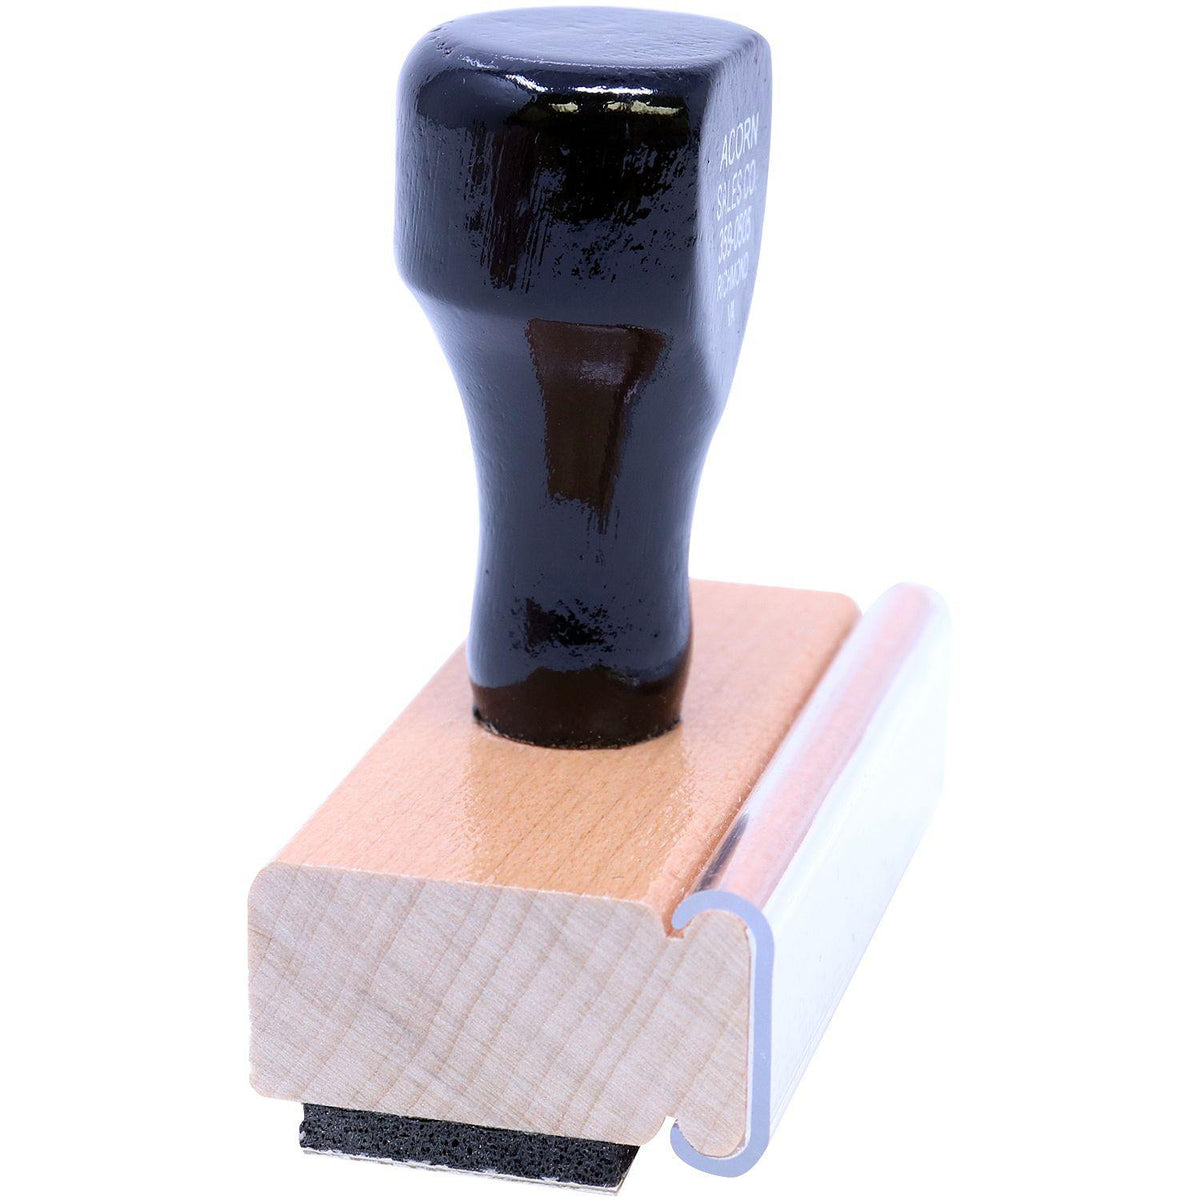 Side View of Dated Material Open Immediately Rubber Stamp at an Angle